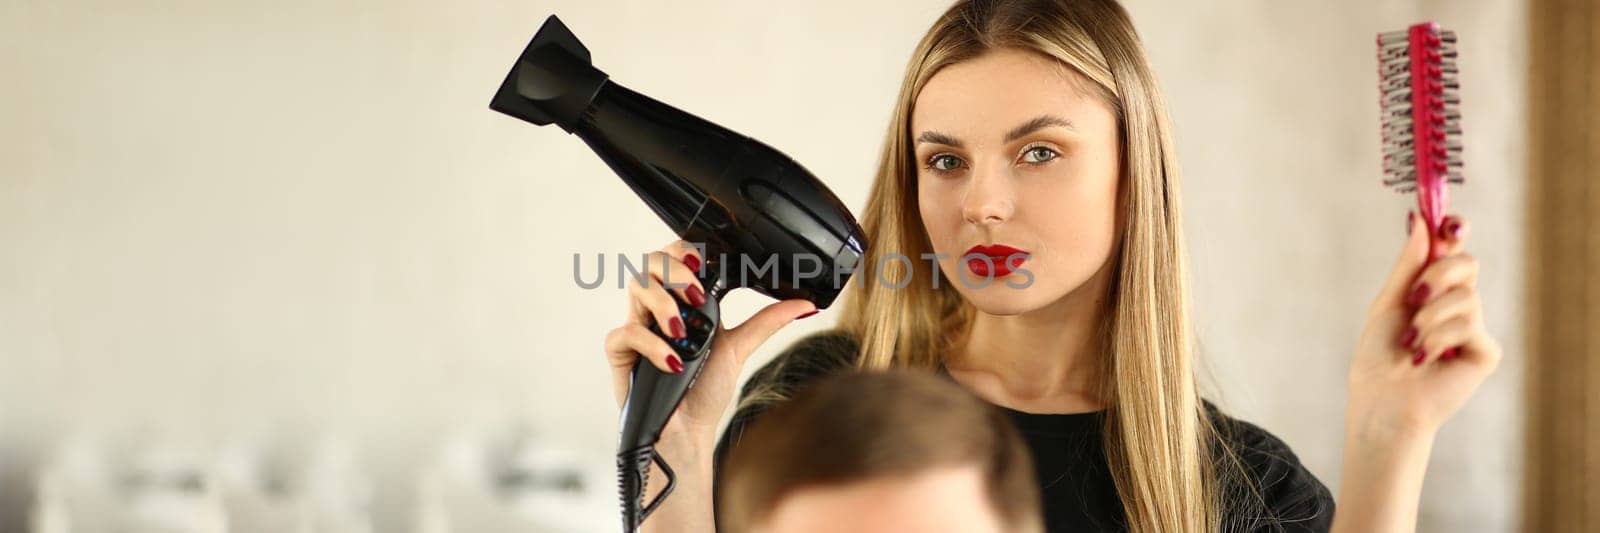 Woman hairdresser is holding hair dryer and hairbrush man is sitting in barbershop chair. Stylish trendy men's hairstyles and styling concept